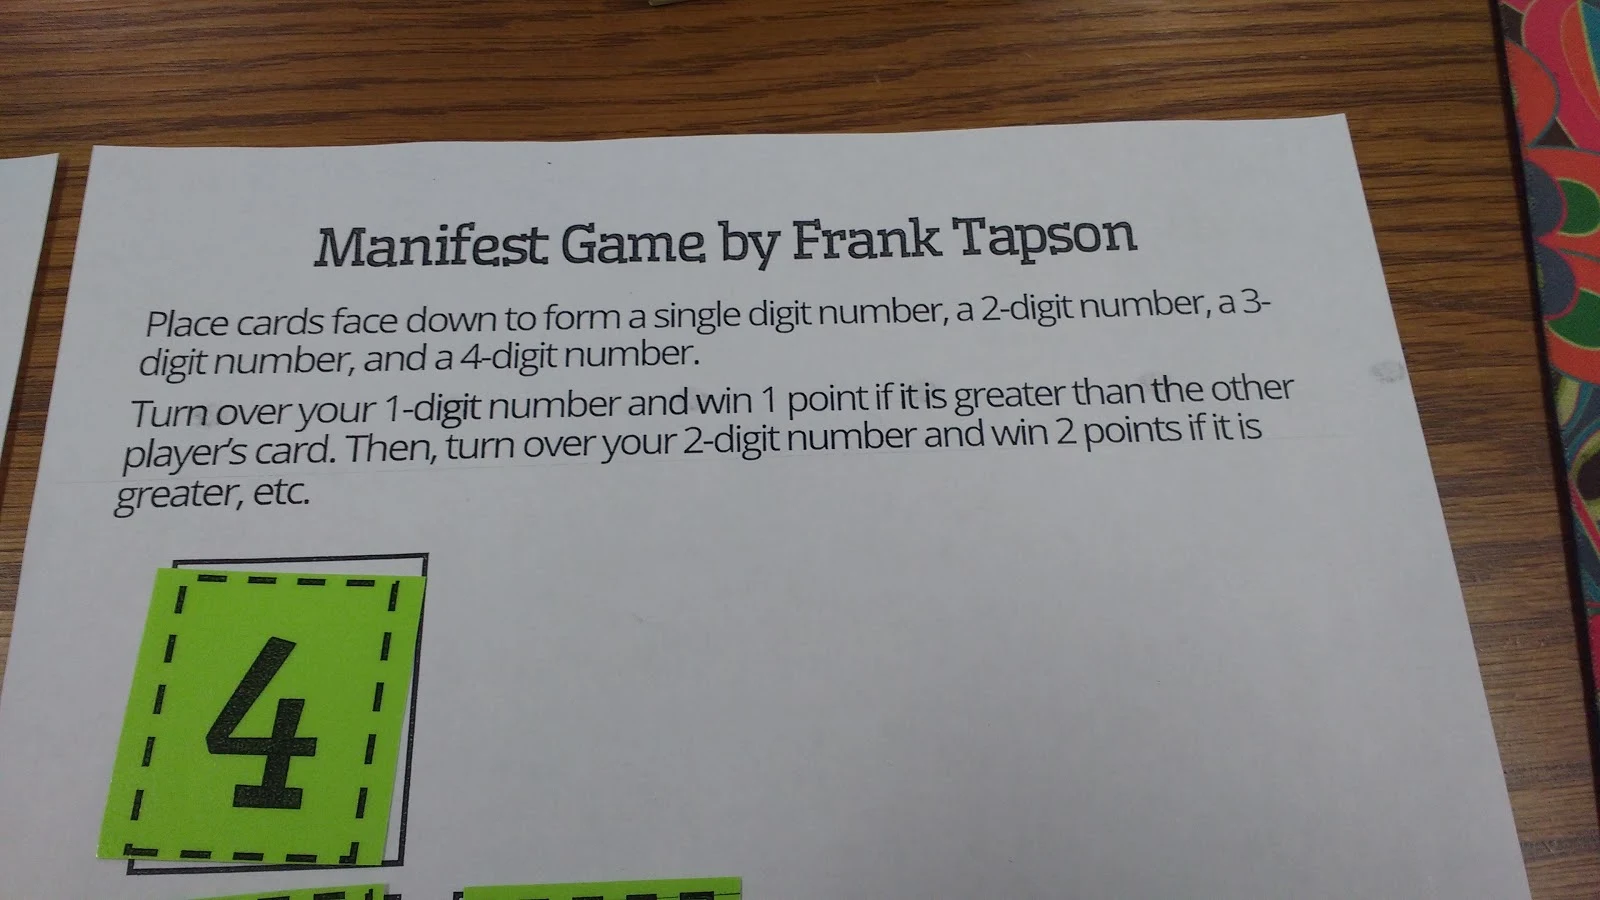 Manifest Game by Frank Tapson